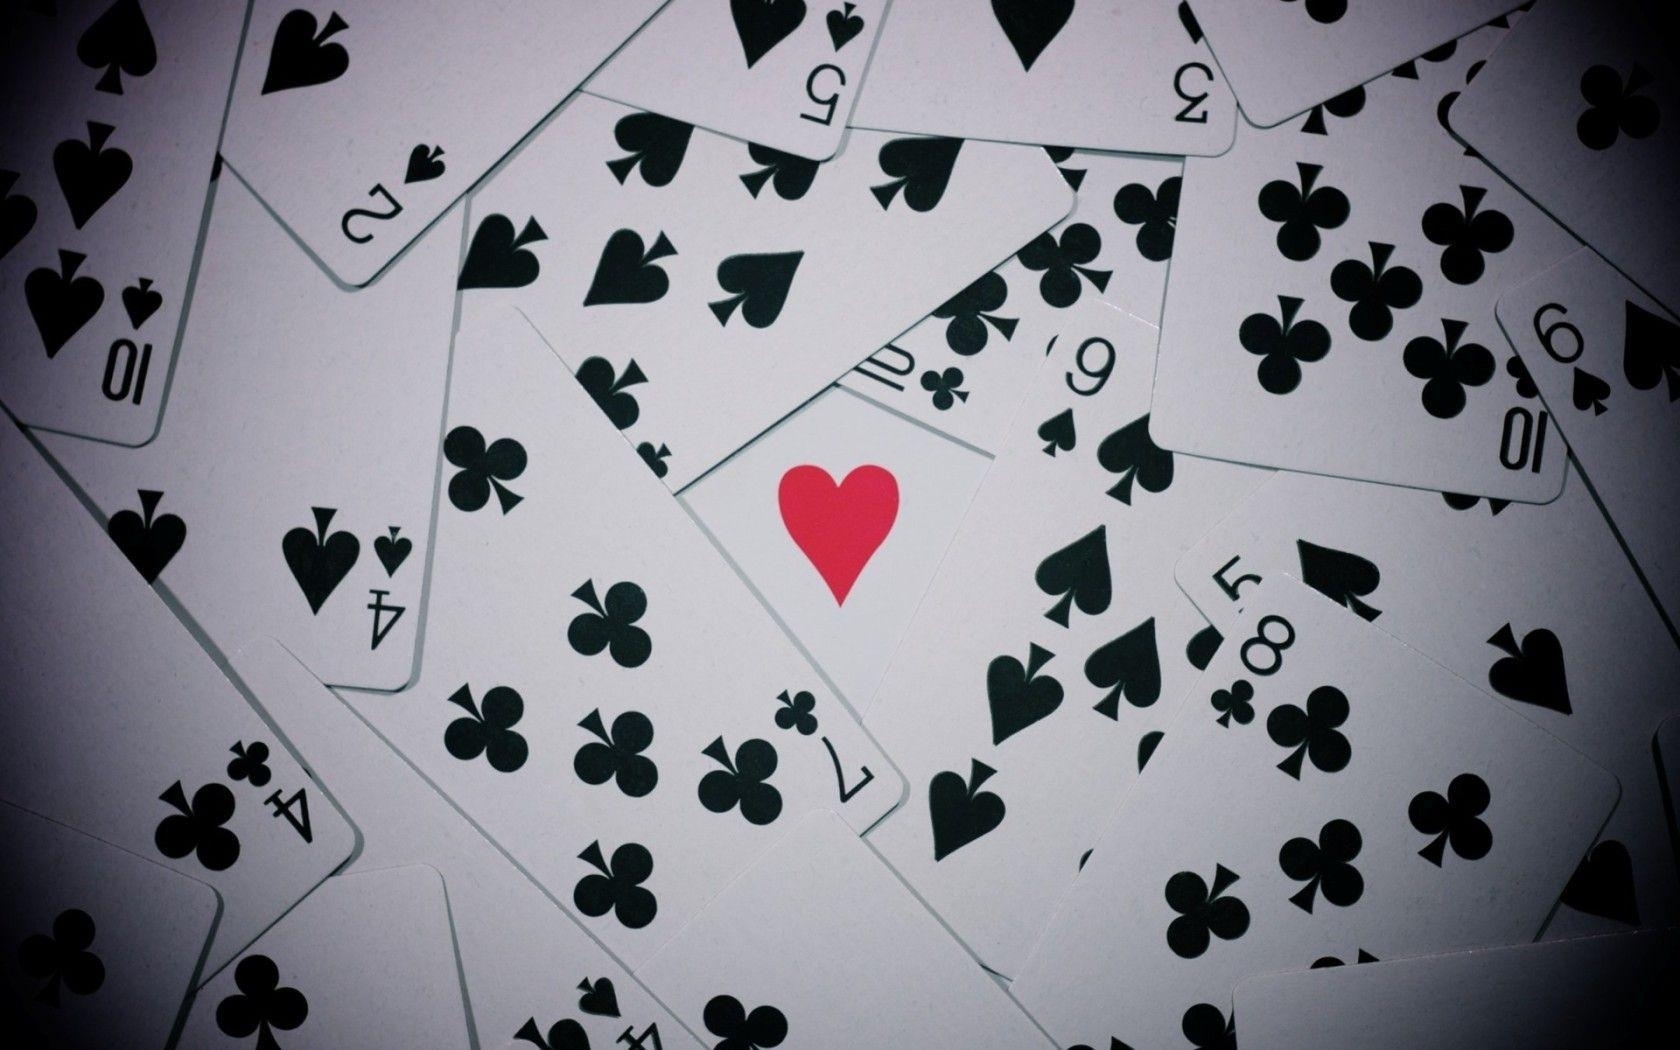 10 Top Deck Of Cards Wallpaper FULL HD 1920×1080 For PC Background